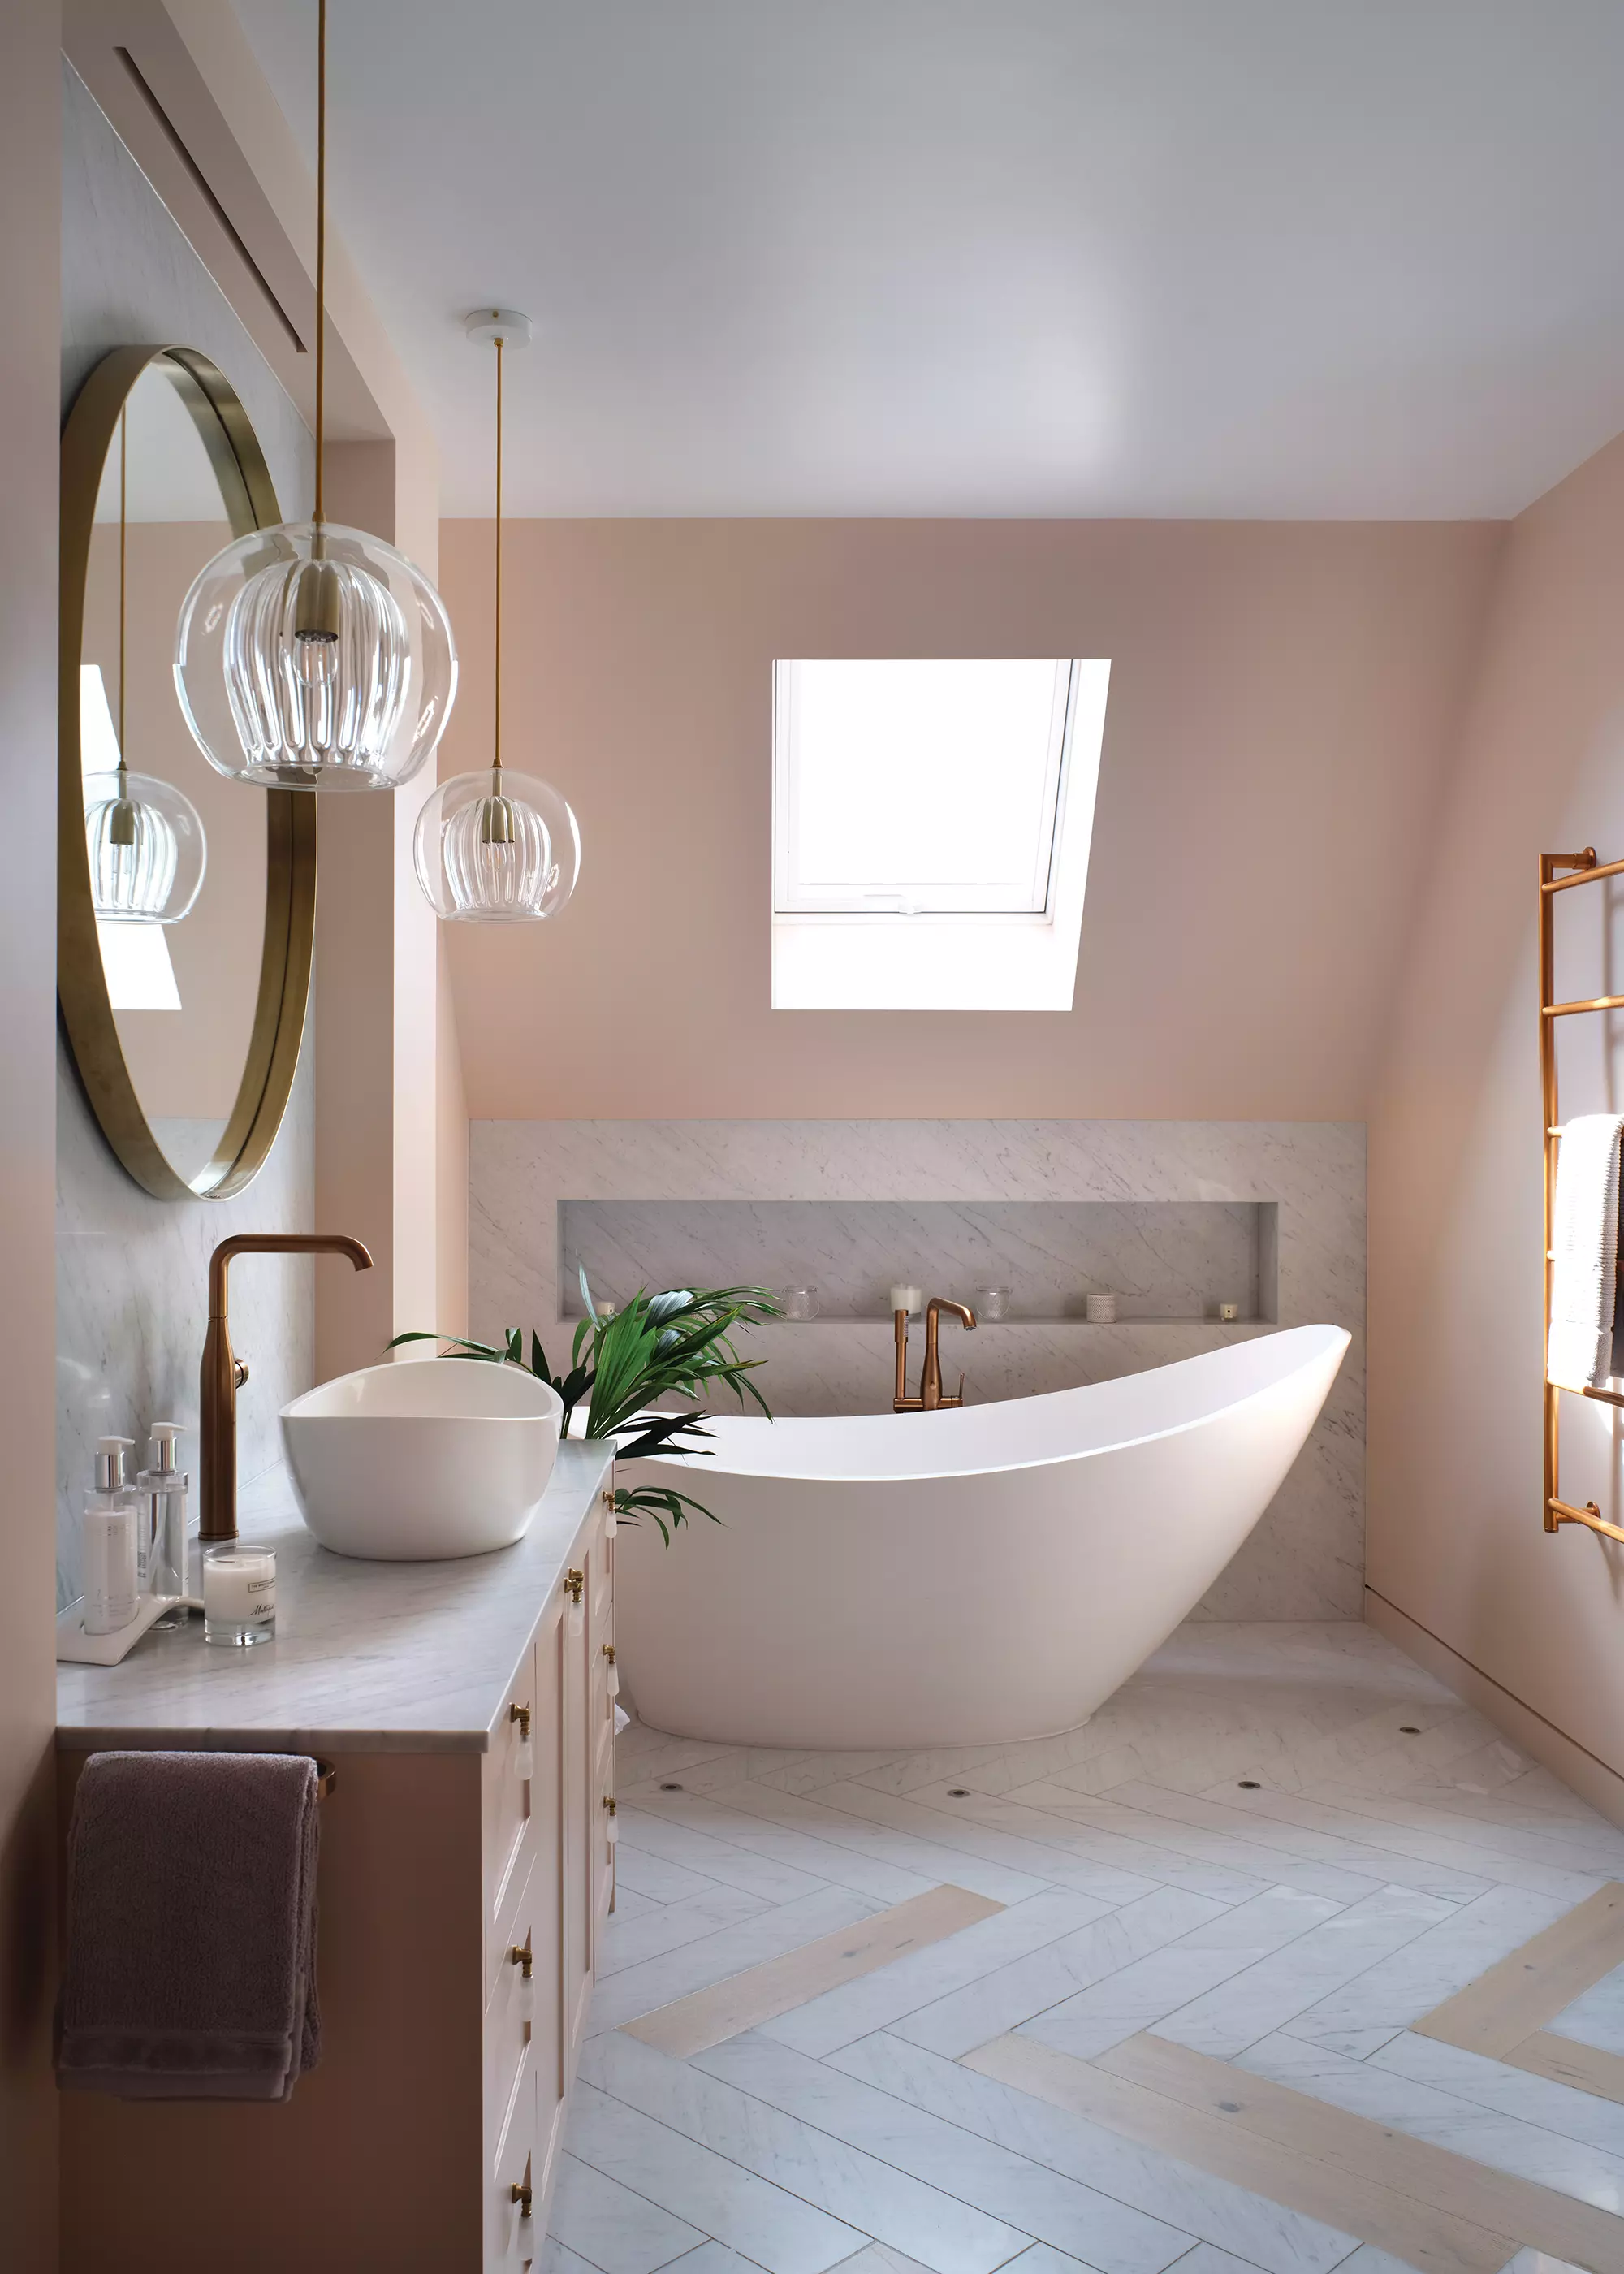 Remember Colour Coordination When Gathering Your Bathroom Ideas